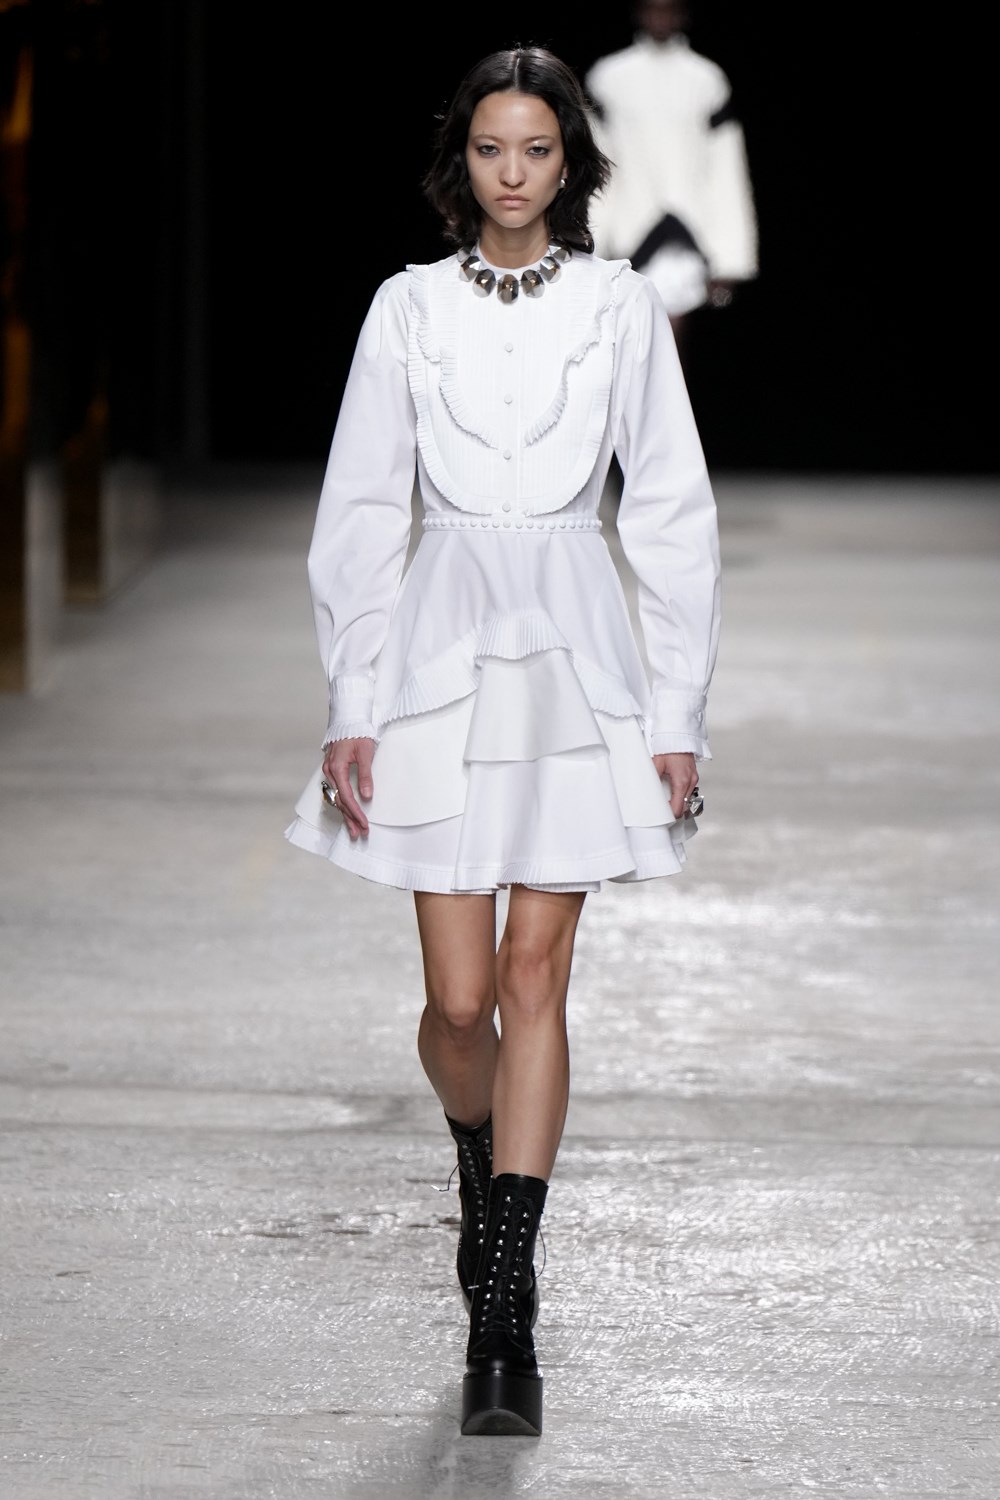 Review of Ports 1961 Fall 2022 Fashion Show